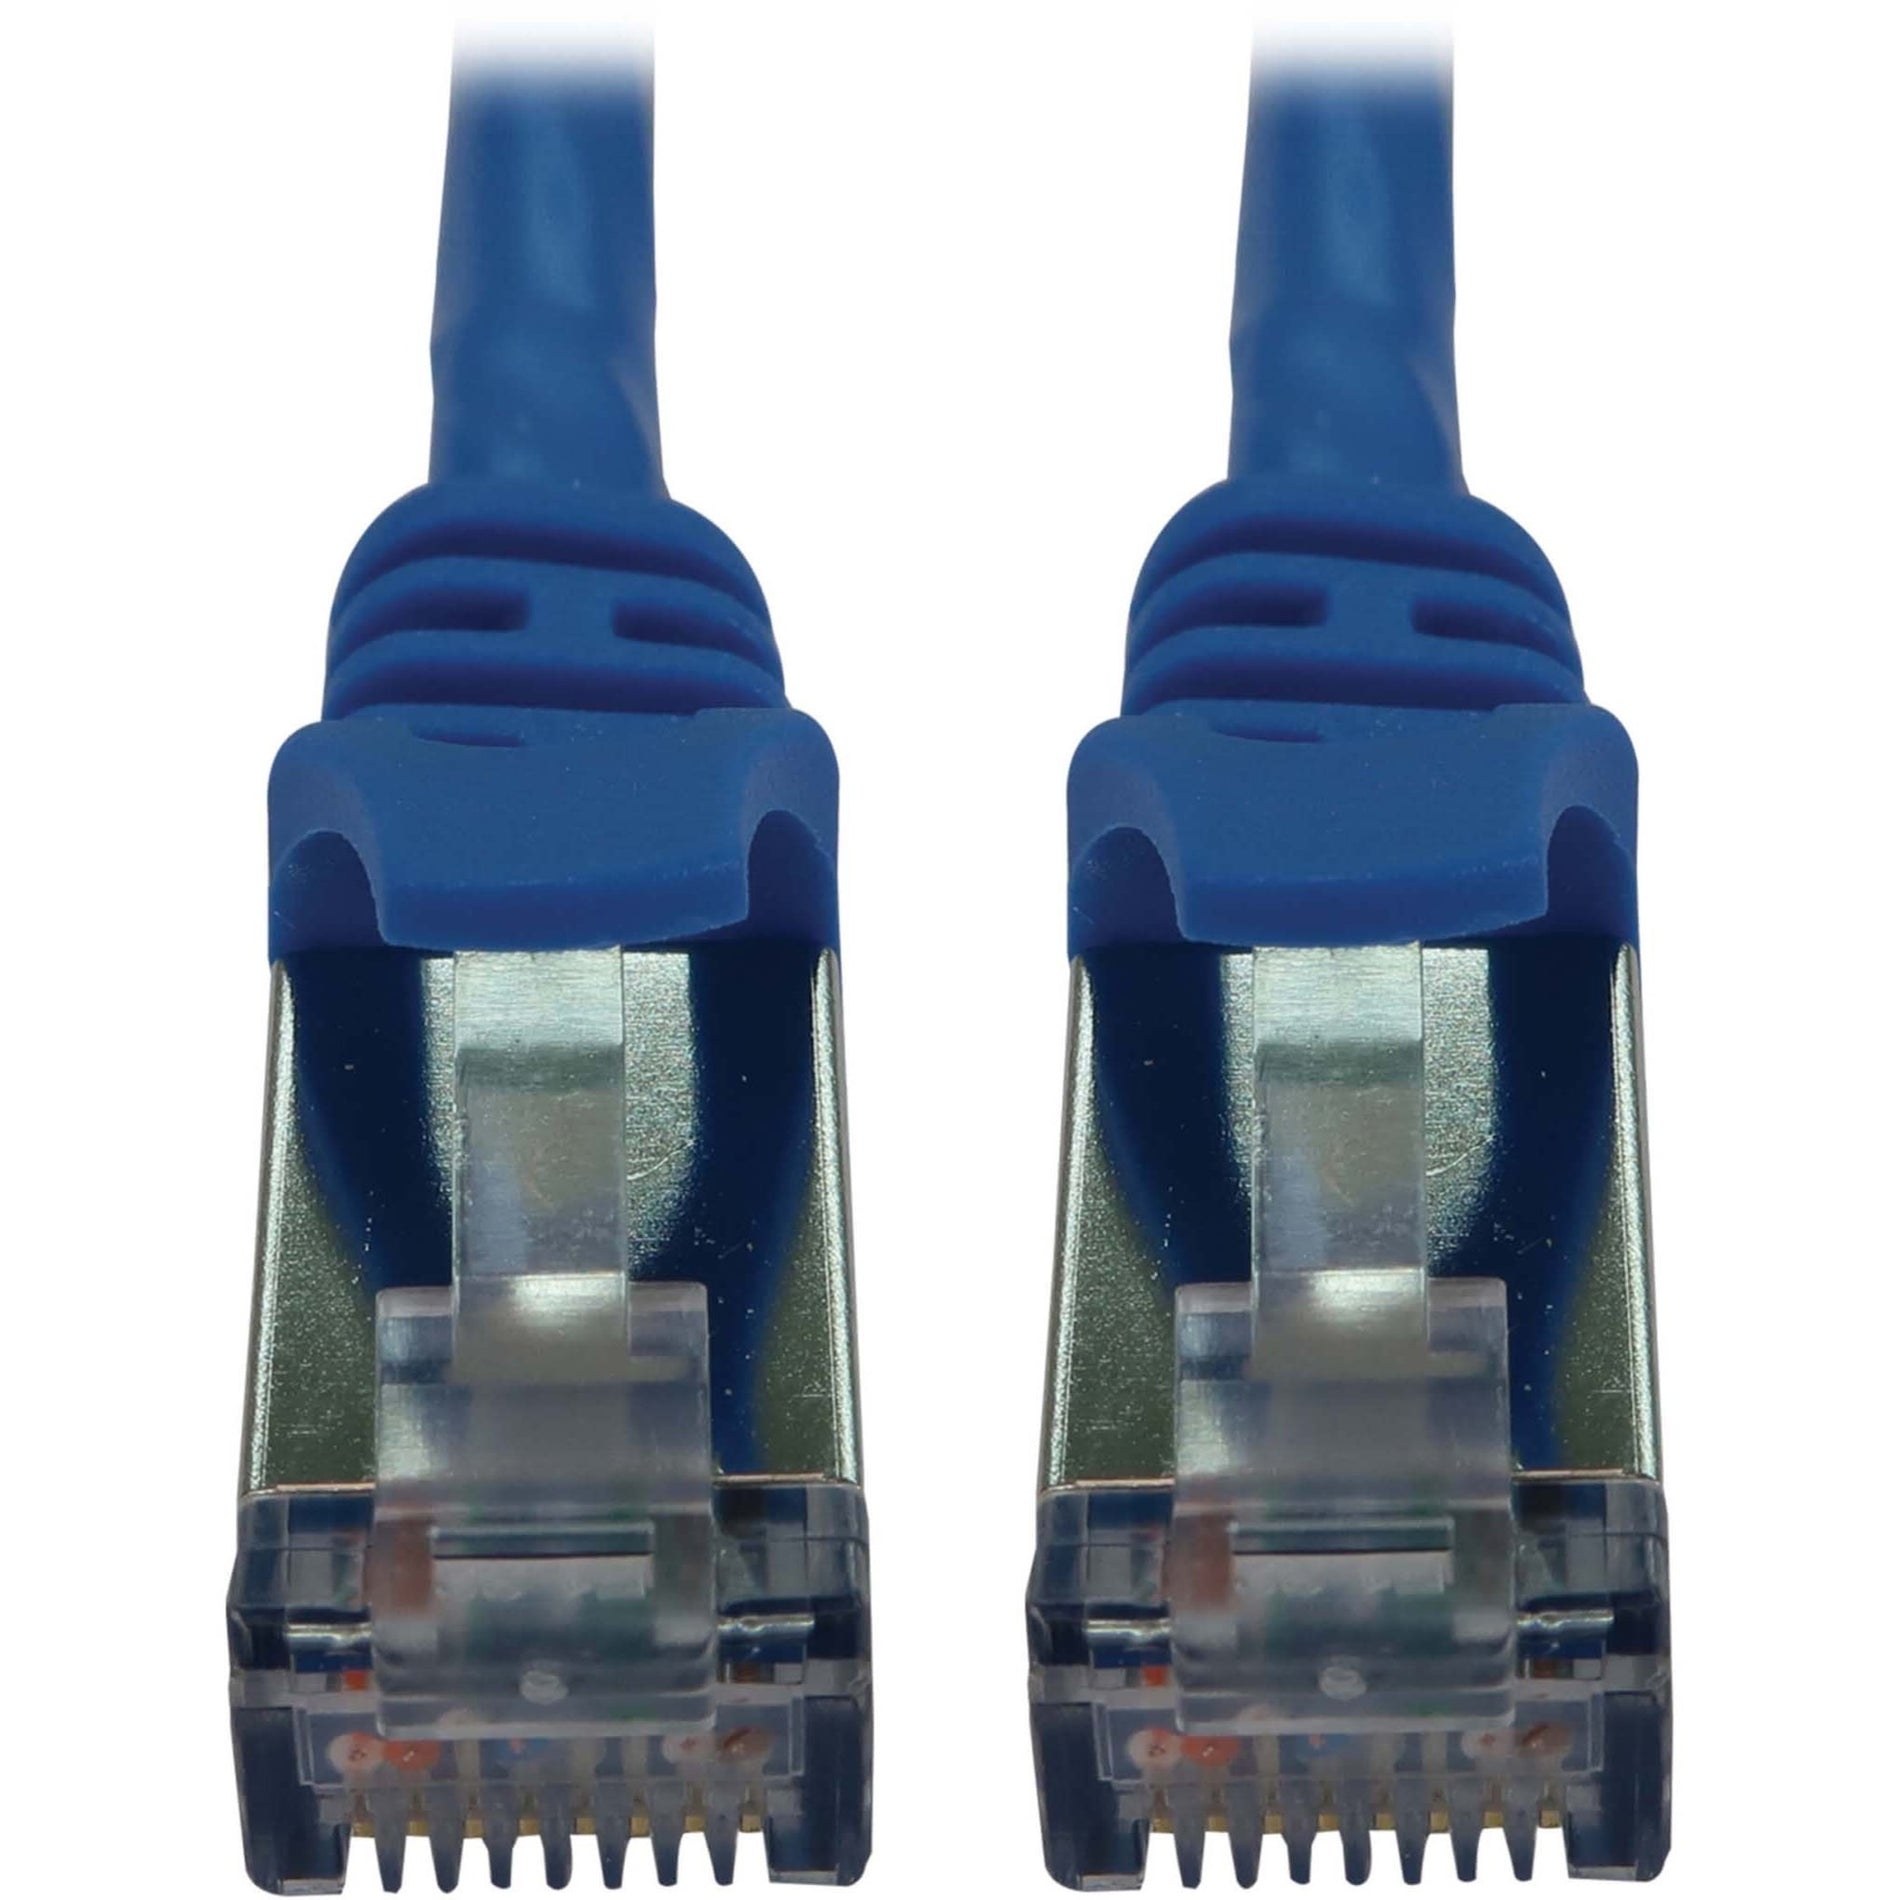 Tripp Lite N262-S10-BL Cat6a STP Patch Network Cable, Snagless Shielded Slim 10G M/M Blue 10ft